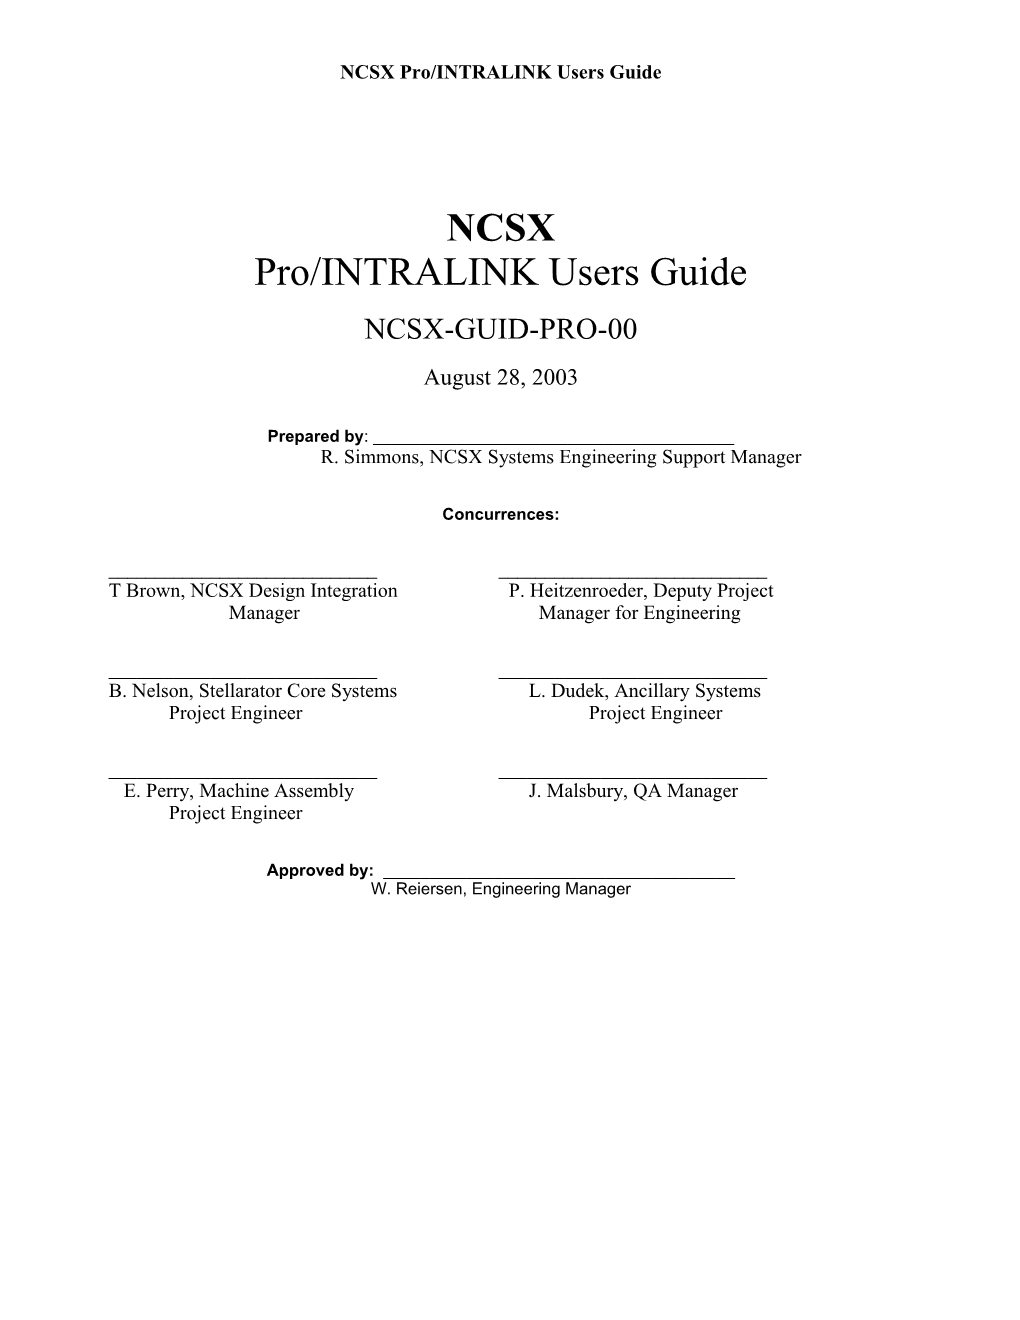 NCSX Pro/INTRALINK Users Guide